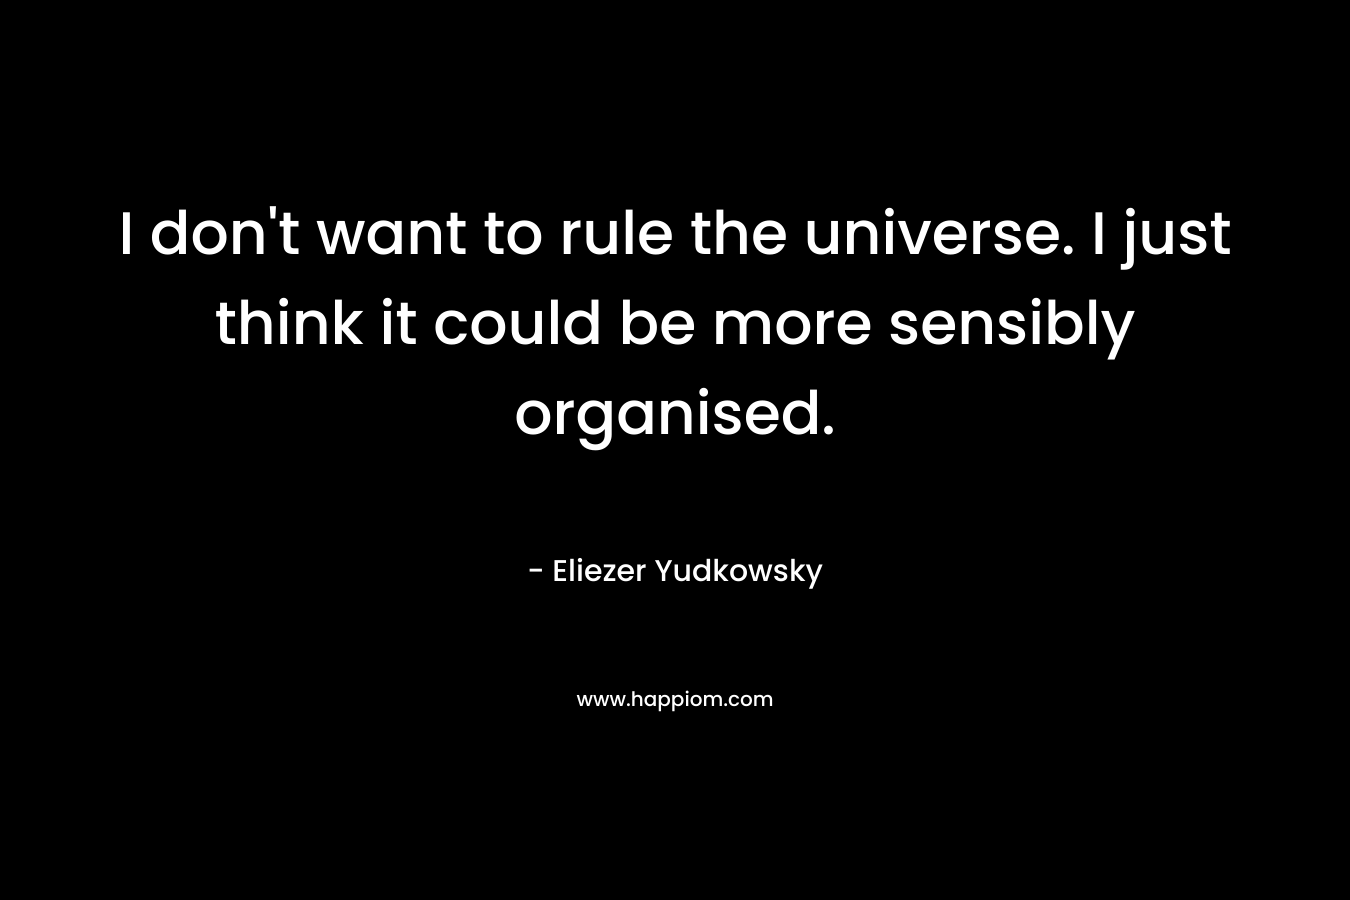 I don't want to rule the universe. I just think it could be more sensibly organised.